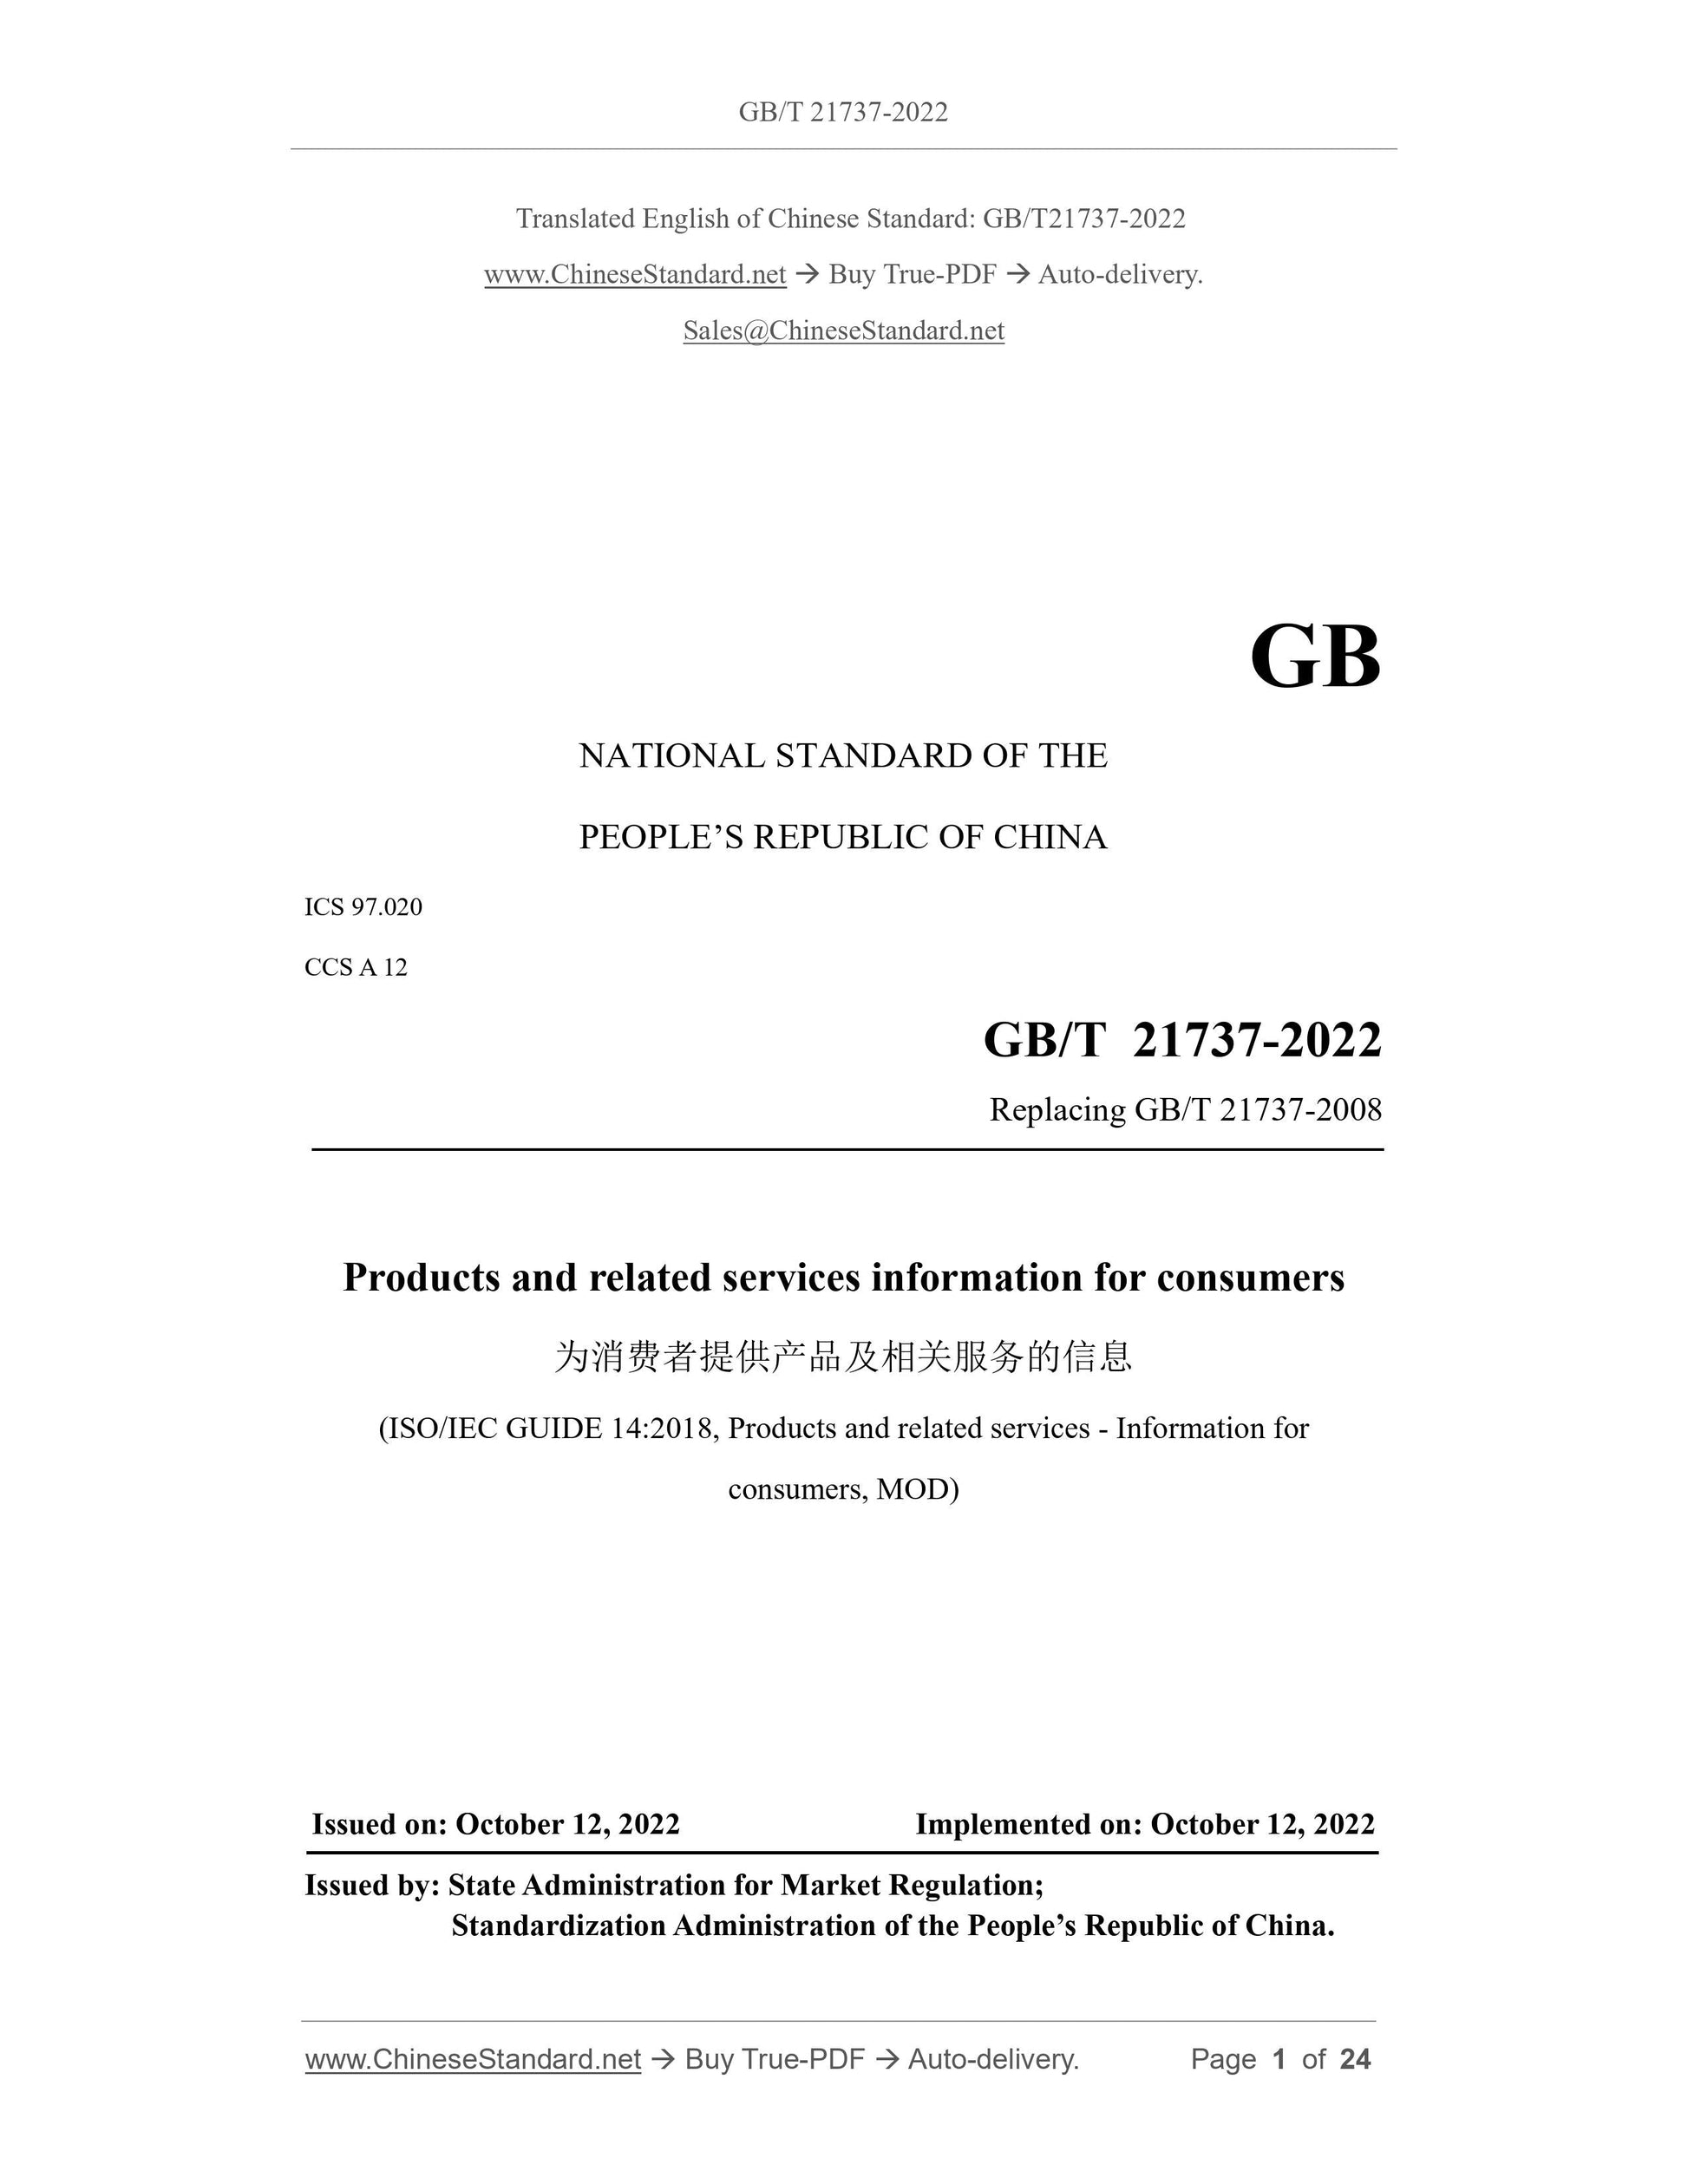 GB/T 21737-2022 Page 1